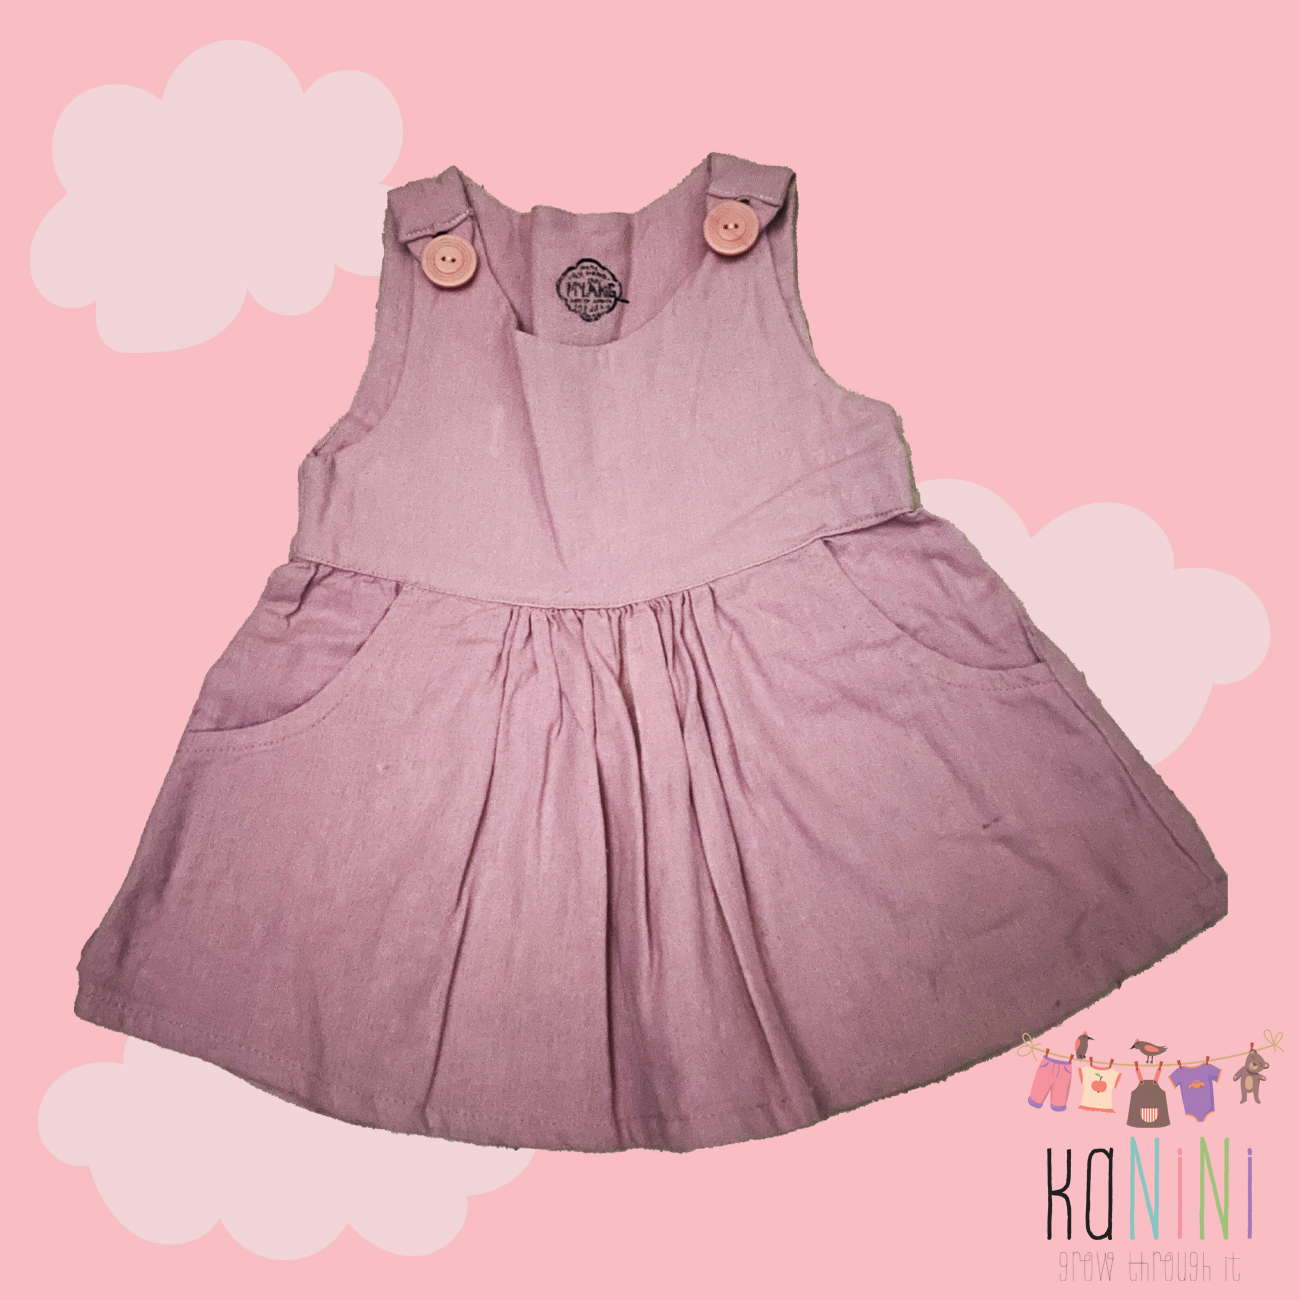 Featured image for “Myang 6 - 12 Months Girls Pink Dress”